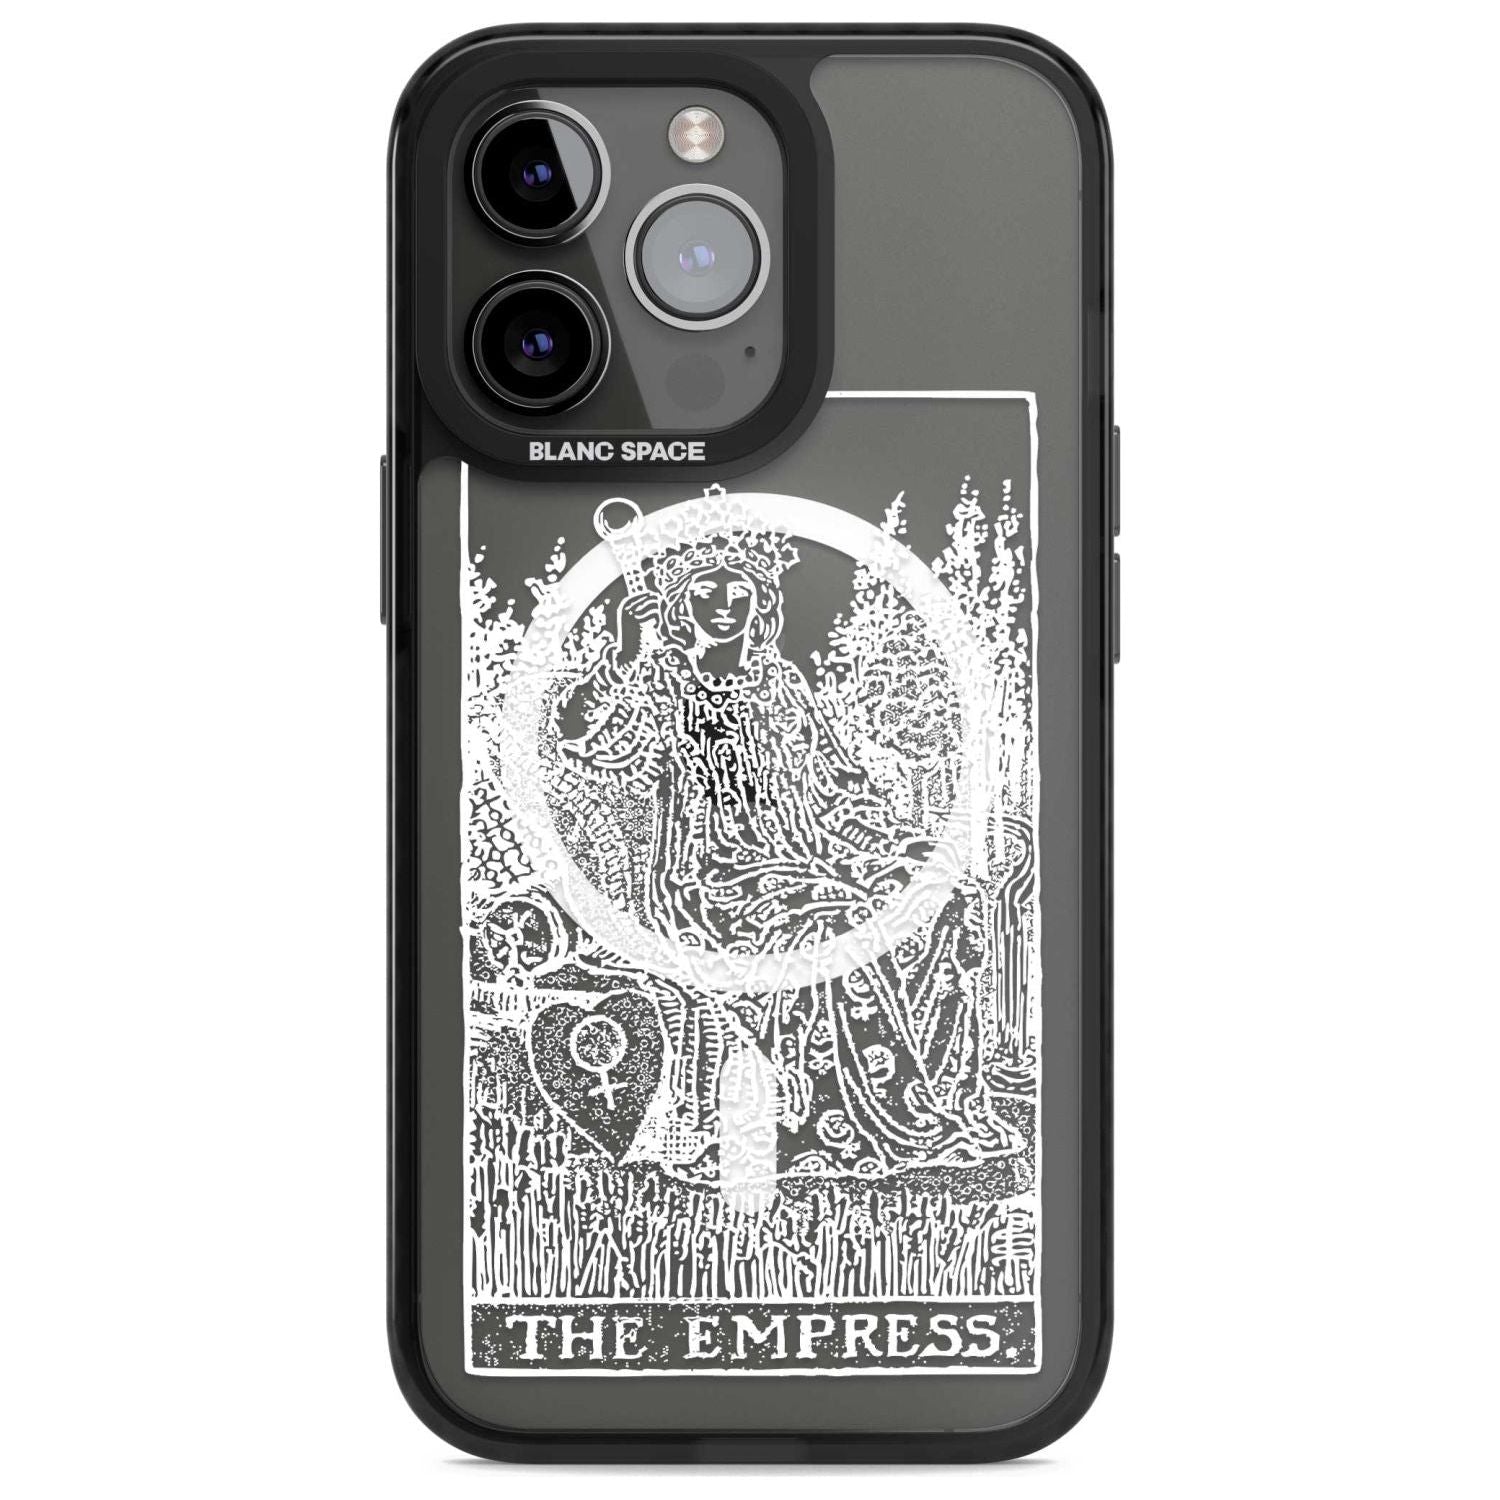 Personalised The Empress Tarot Card - White Transparent Custom Phone Case iPhone 15 Pro Max / Magsafe Black Impact Case,iPhone 15 Pro / Magsafe Black Impact Case,iPhone 14 Pro Max / Magsafe Black Impact Case,iPhone 14 Pro / Magsafe Black Impact Case,iPhone 13 Pro / Magsafe Black Impact Case Blanc Space